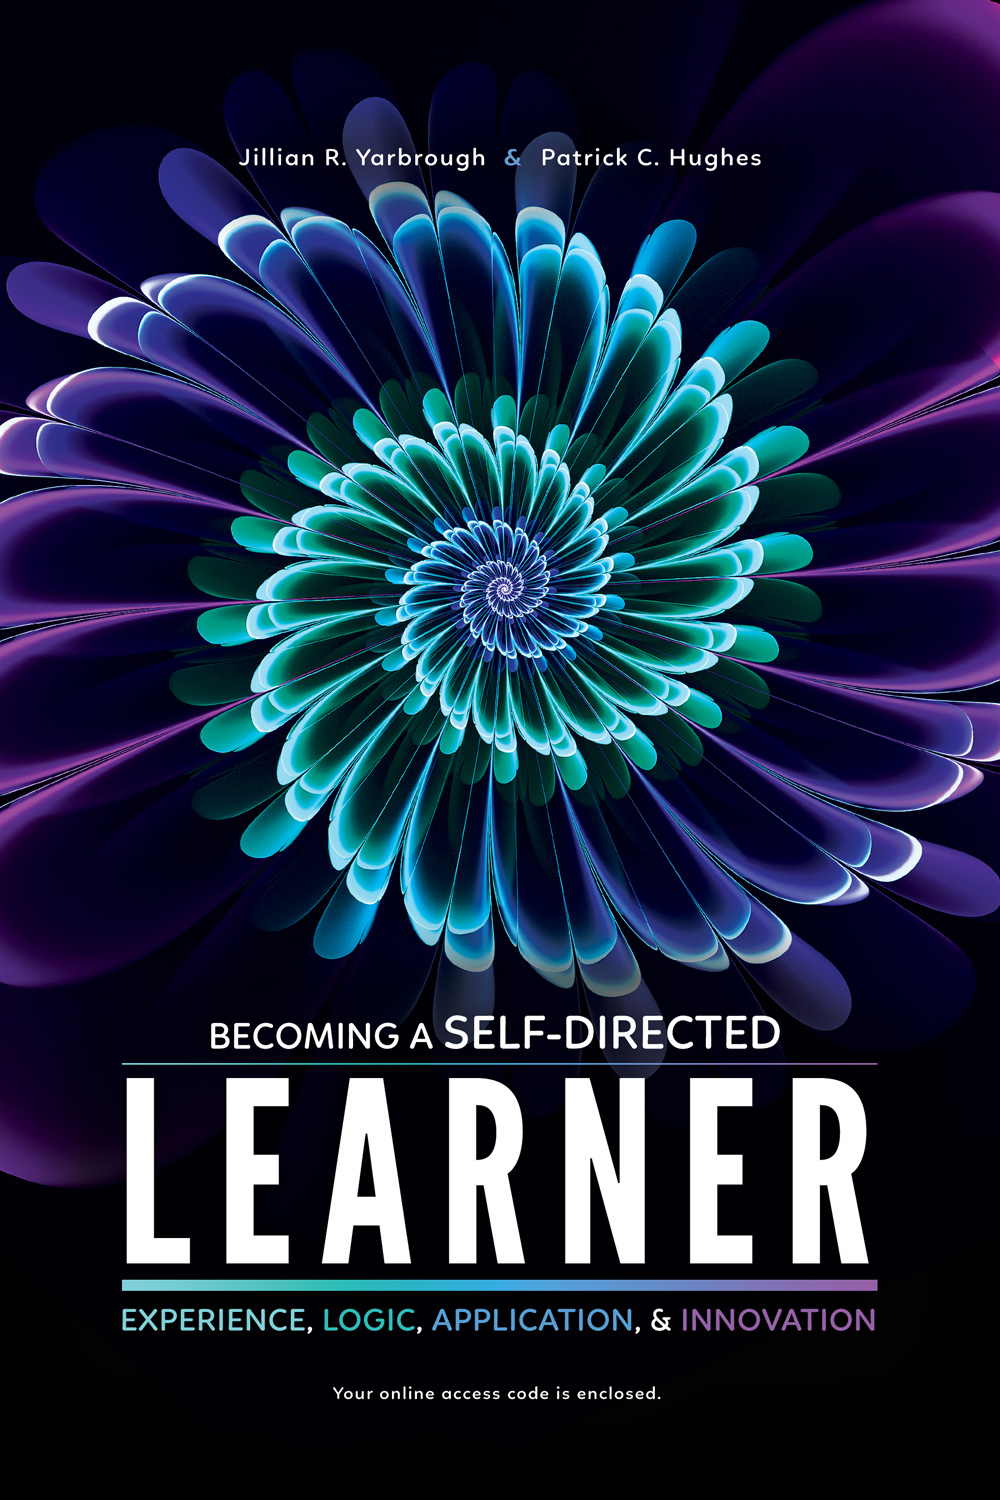 Becoming a Self-Directed Learner: Experience, Logic, Application and Innovation